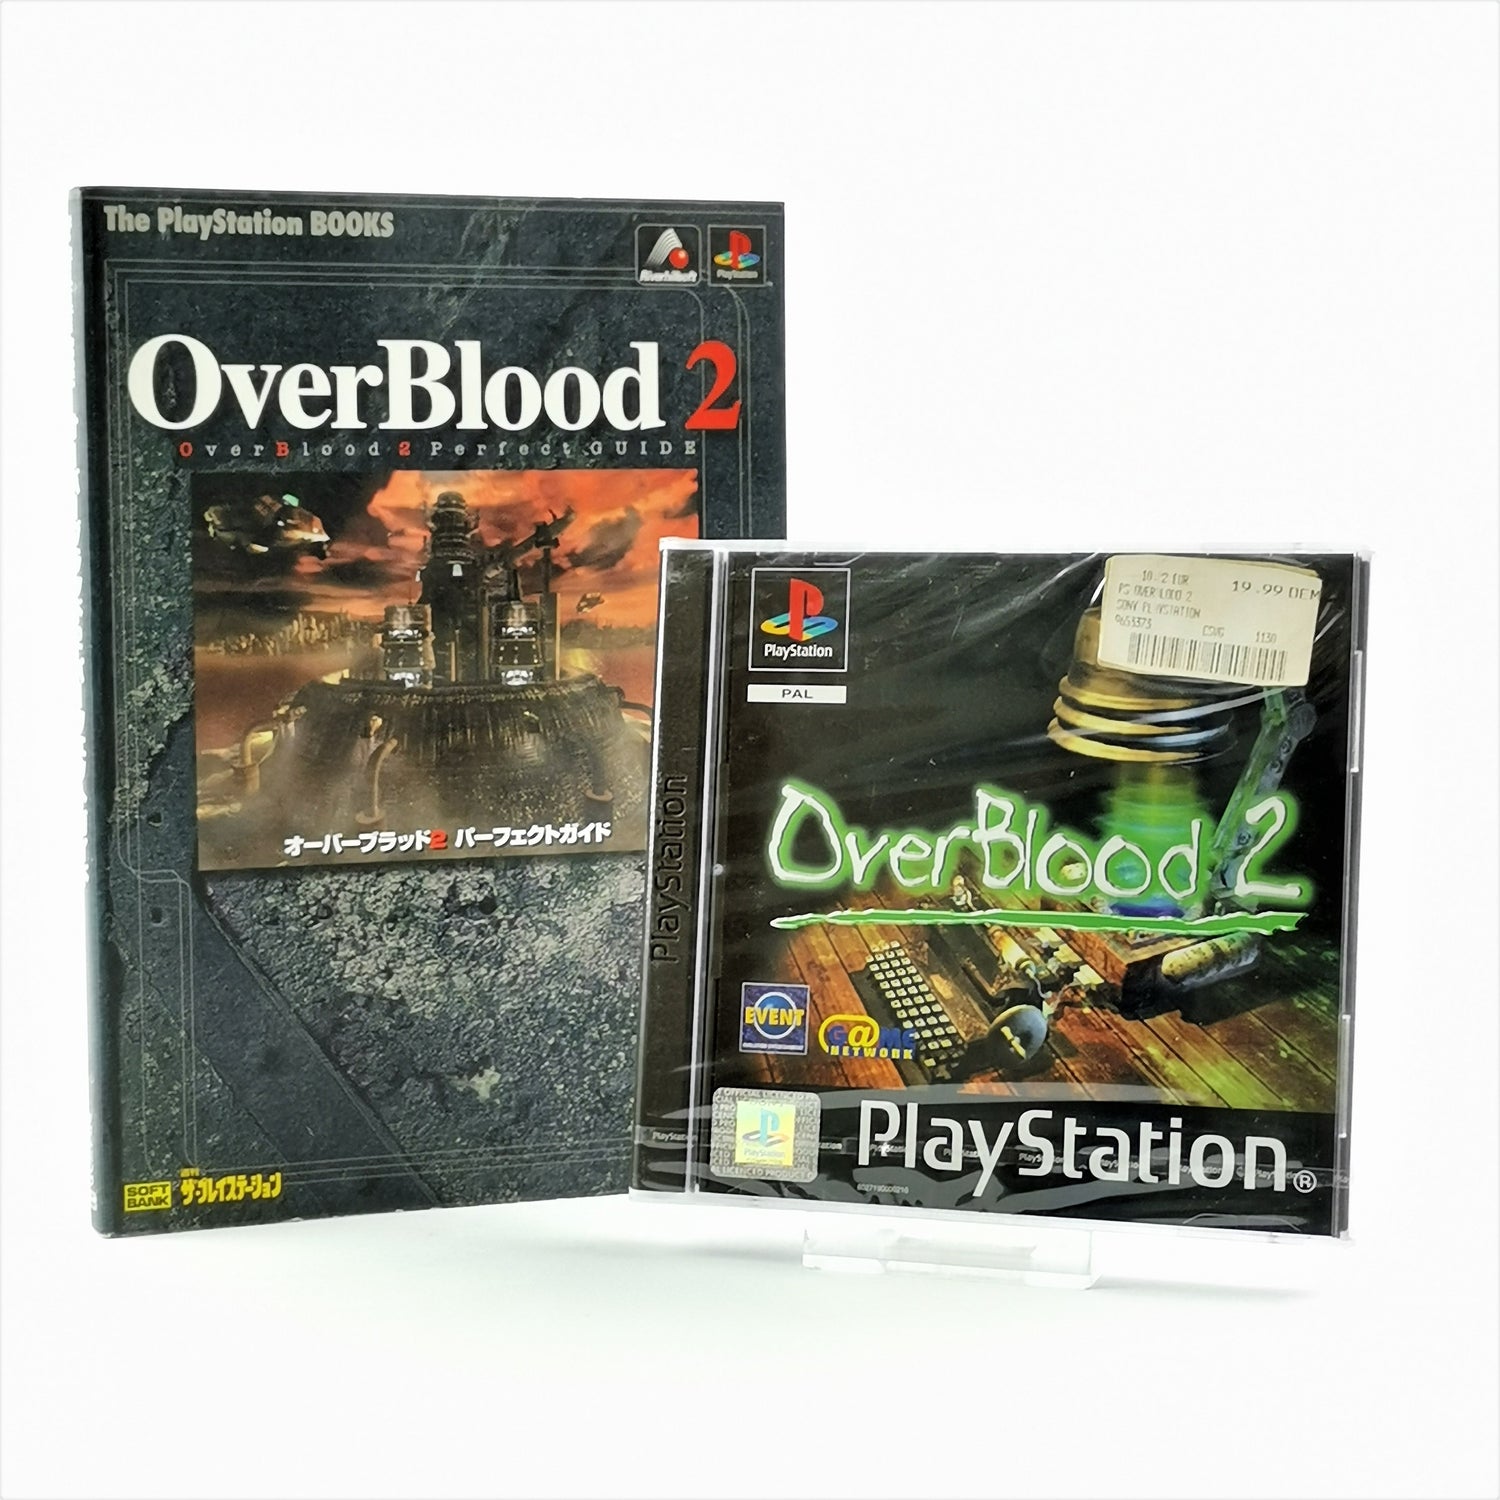 Sony Playstation 1 Game : OverBlood 2 + Perfect Guide Japan - NEW SEALED PS1